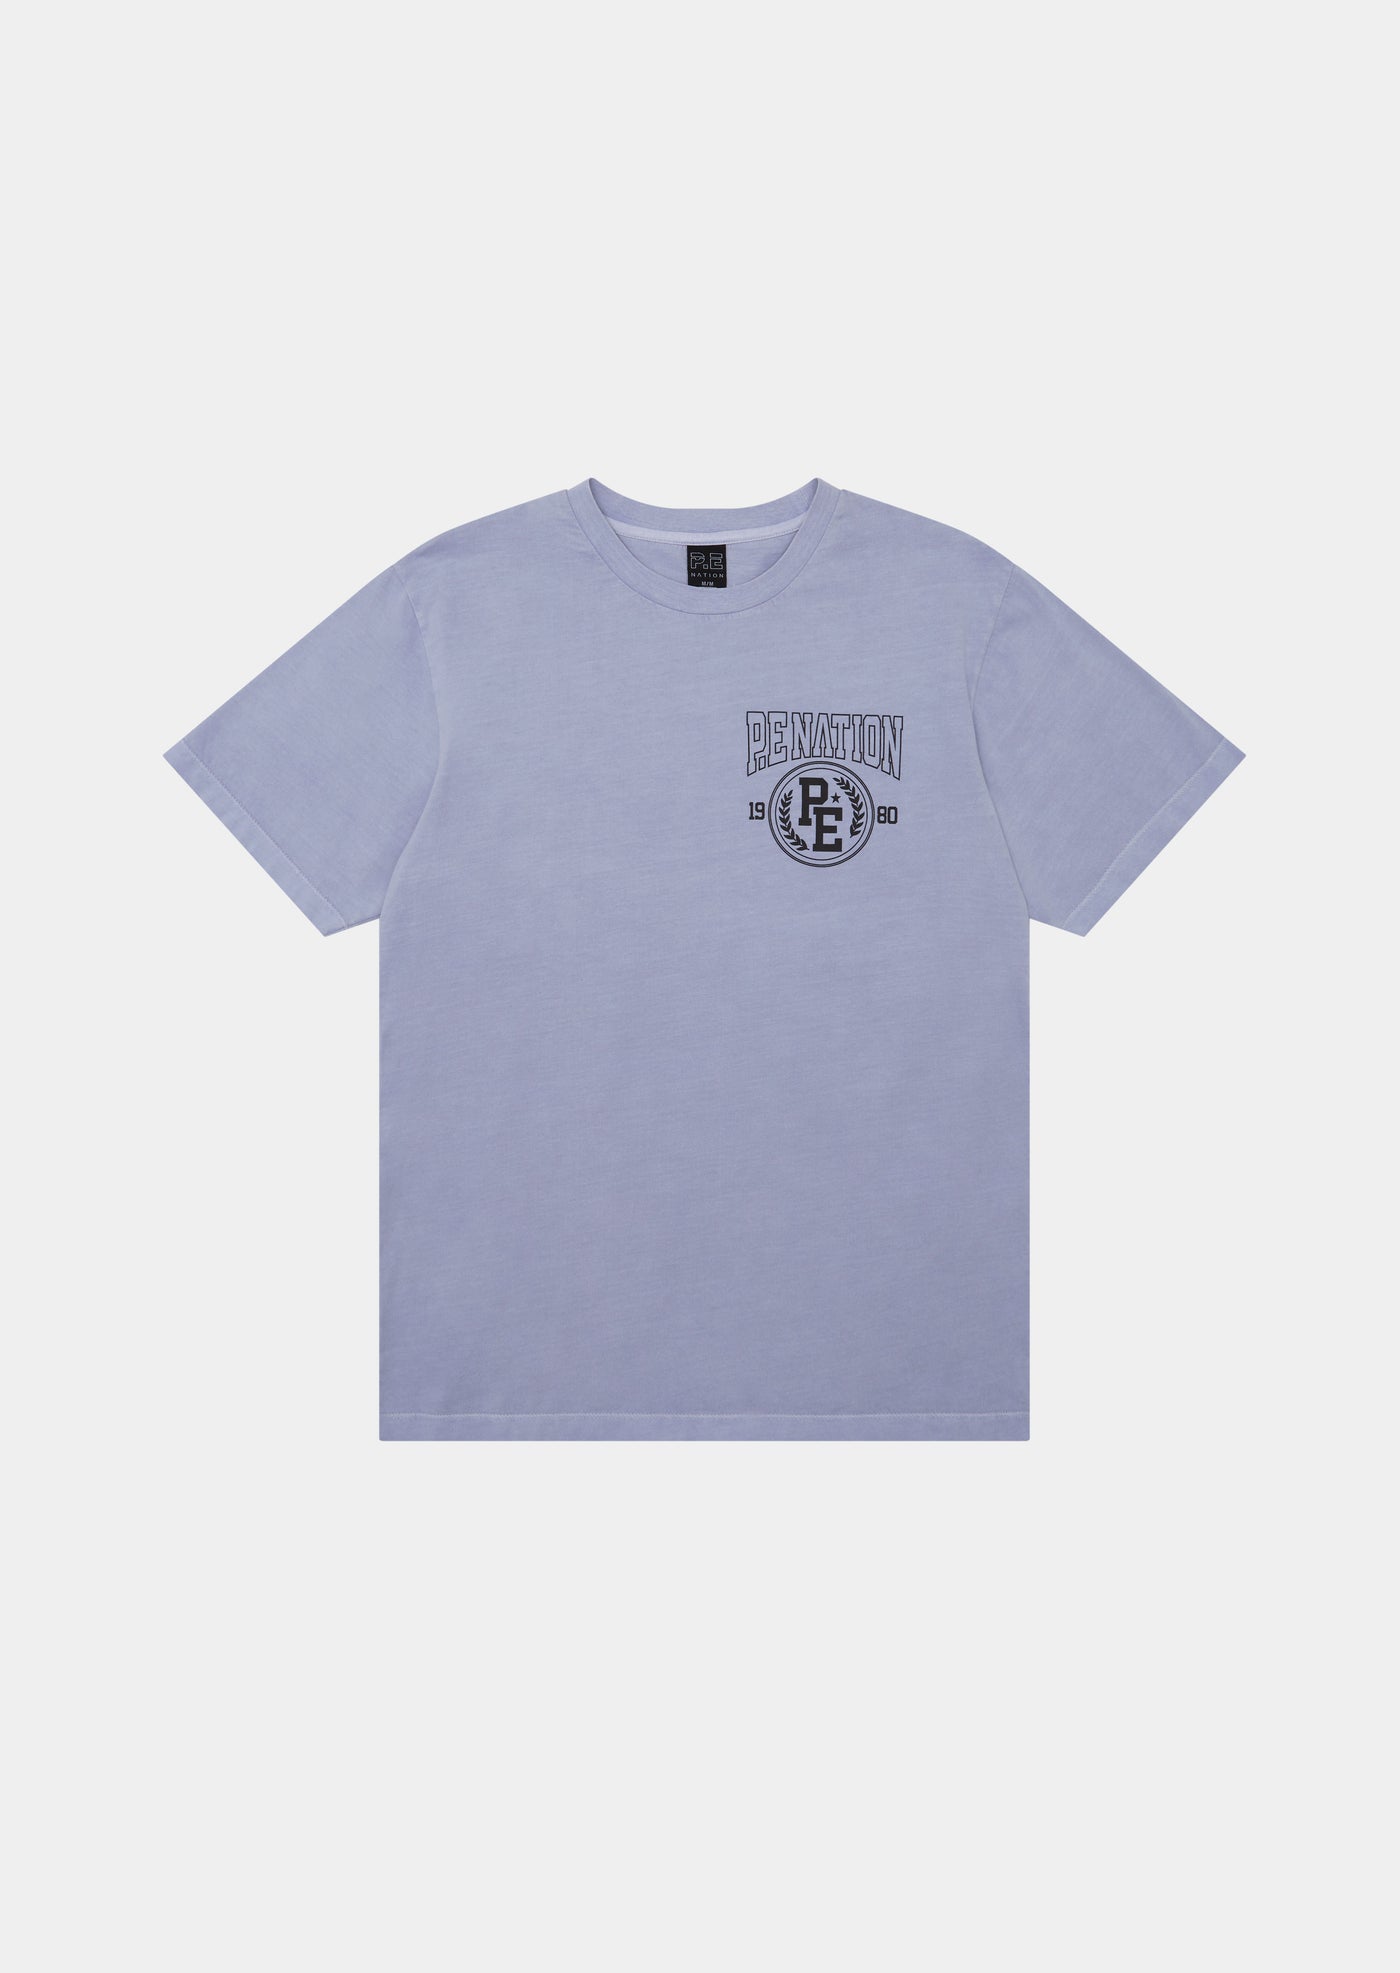 ACE HIGH TEE IN LAVENDER LUSTRE